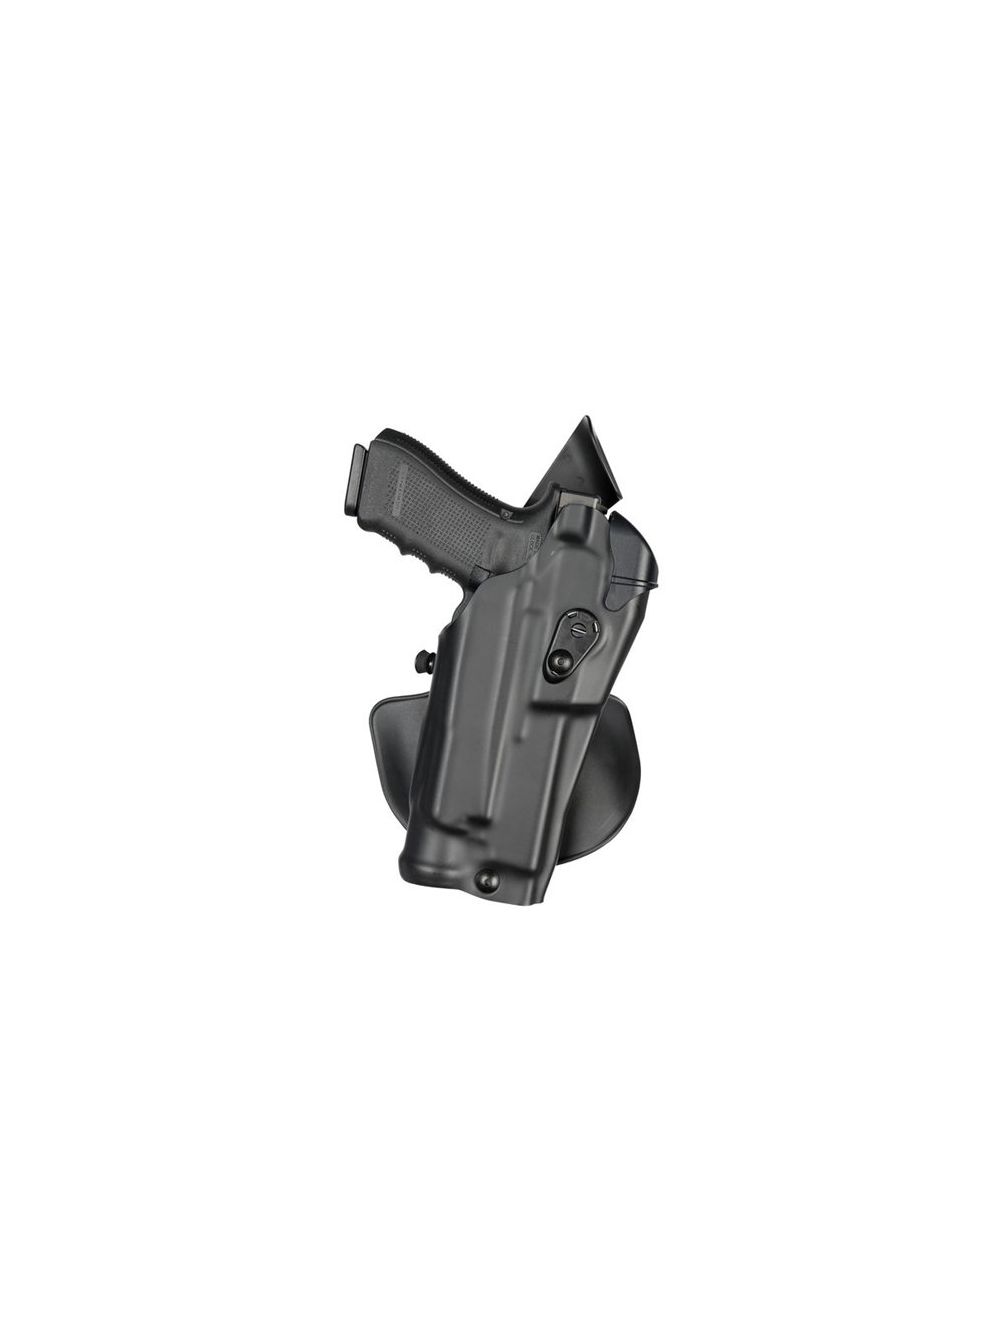 Model 6378RDS ALS Concealment Paddle Holster for Glock 17 MOS w/ Light